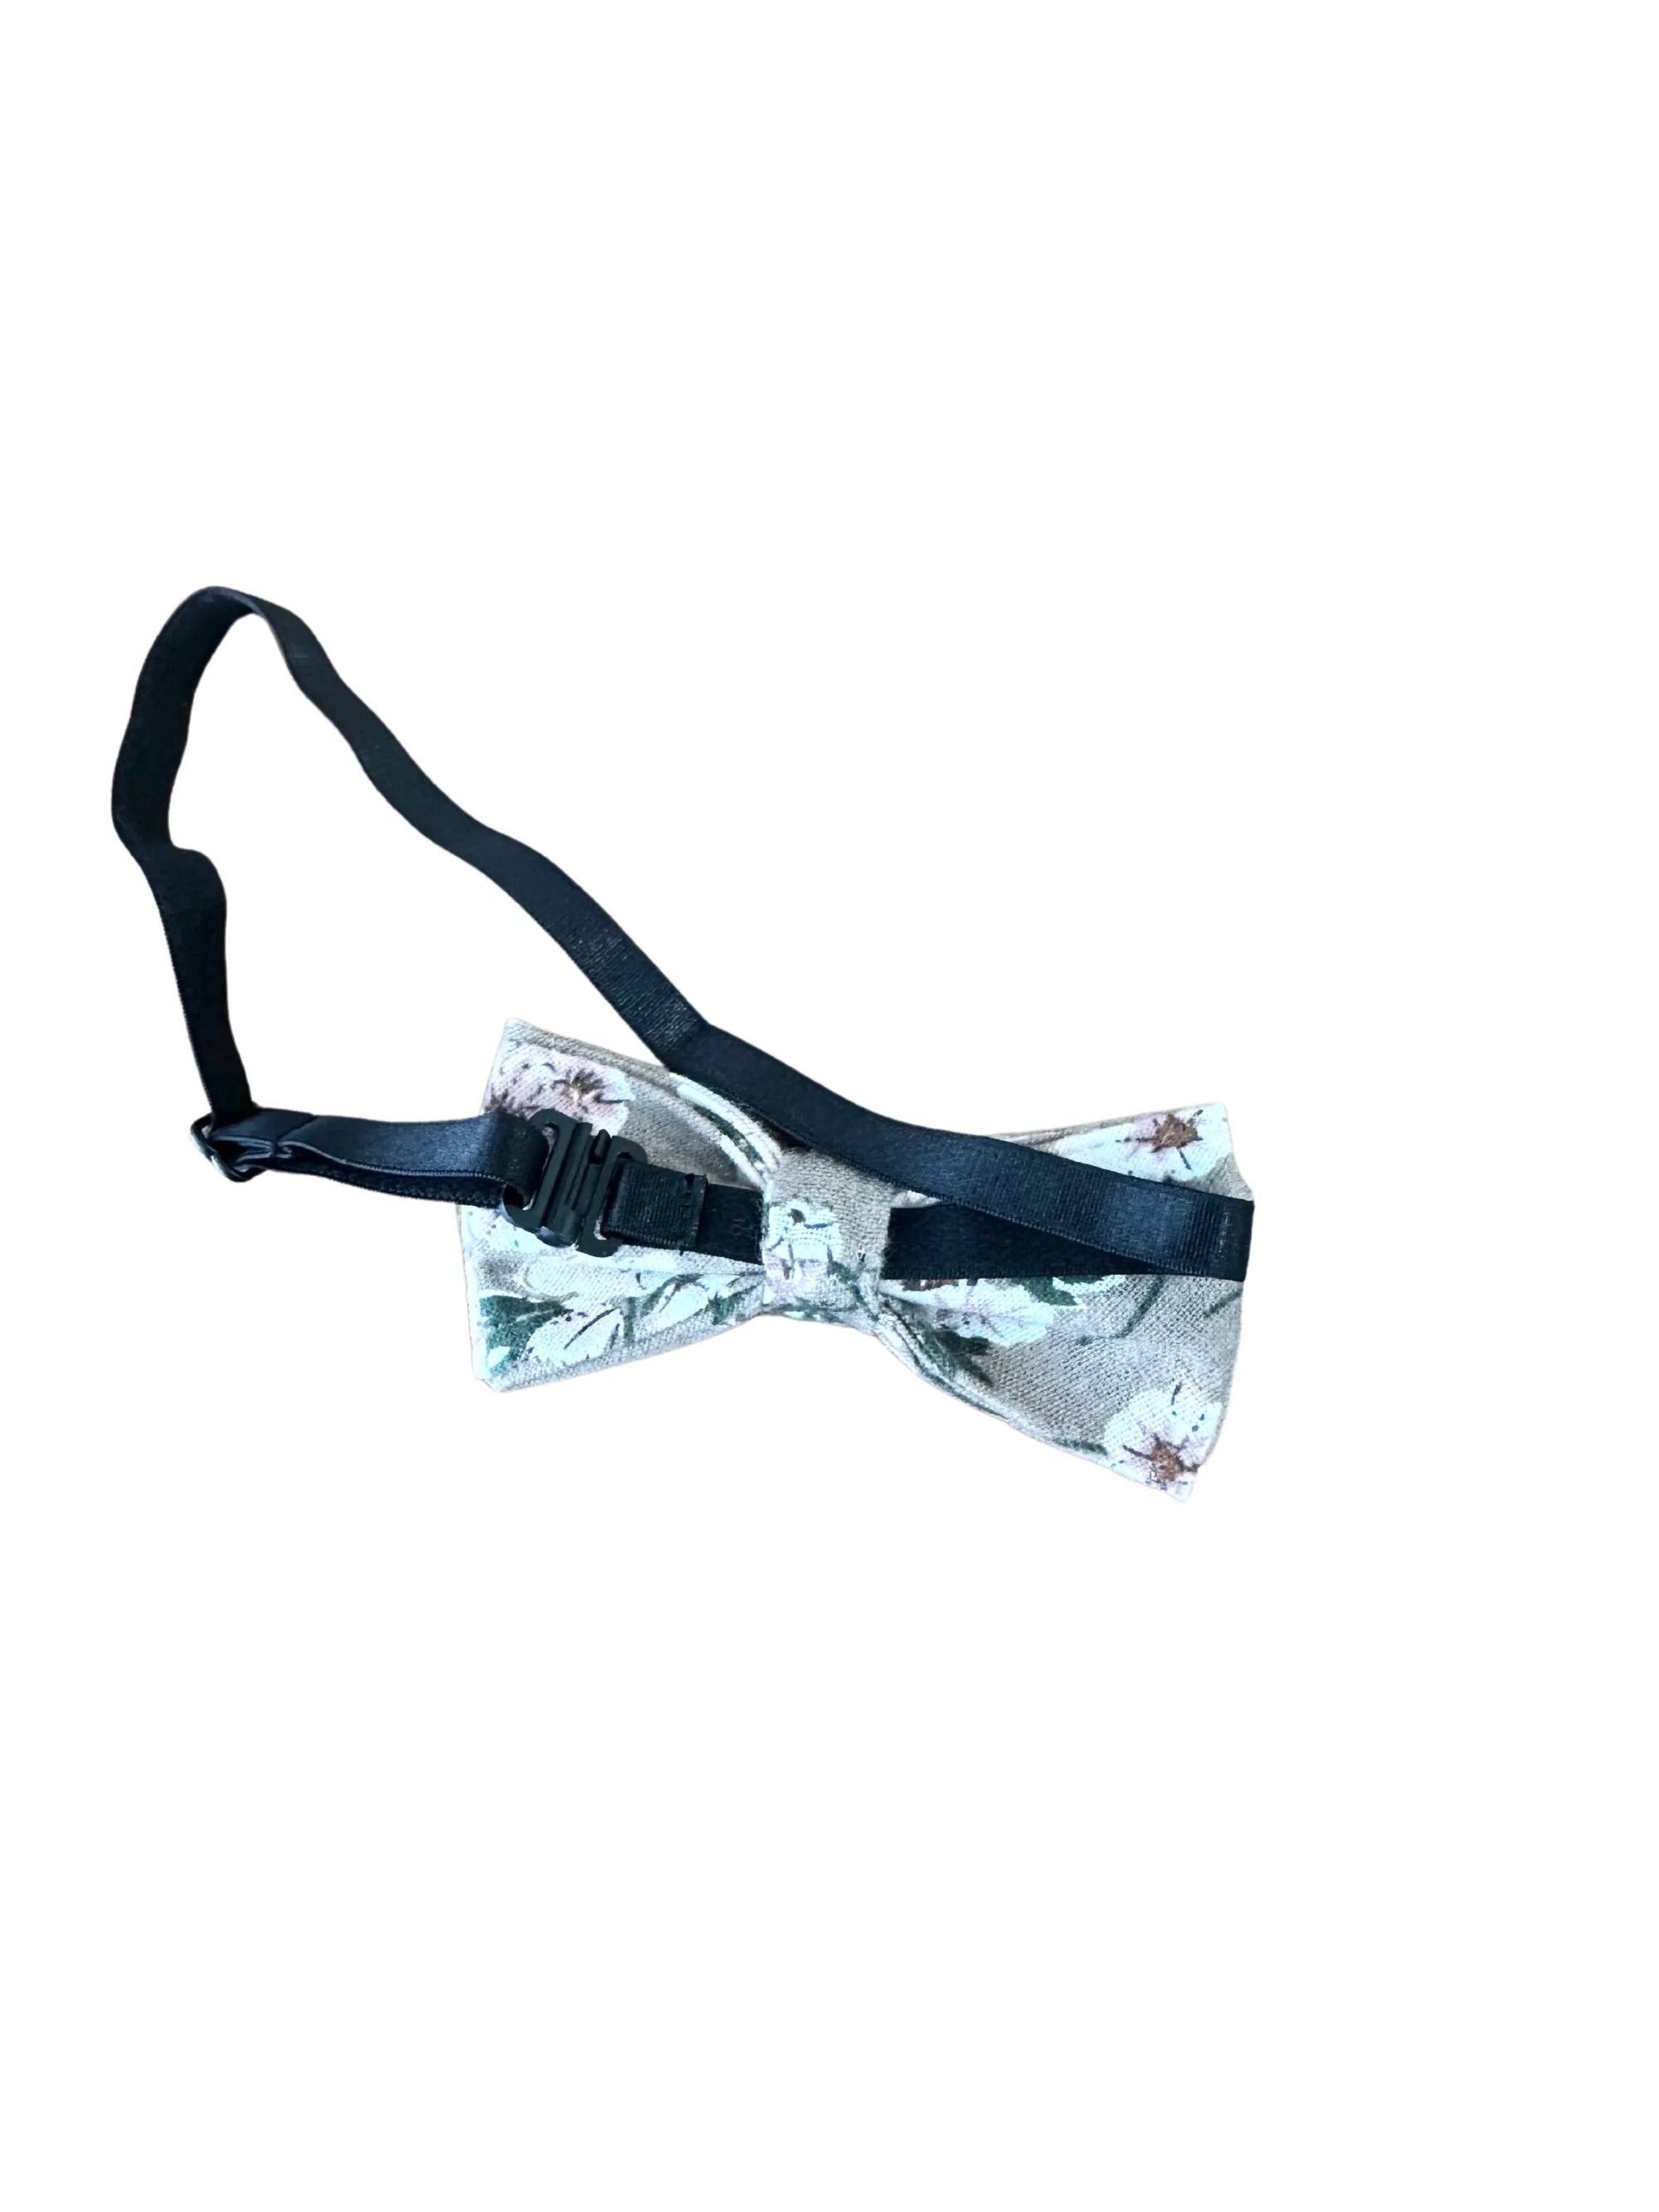 Gray Kids Floral Bow Tie (Pretied) by Mytieshop - DEAN